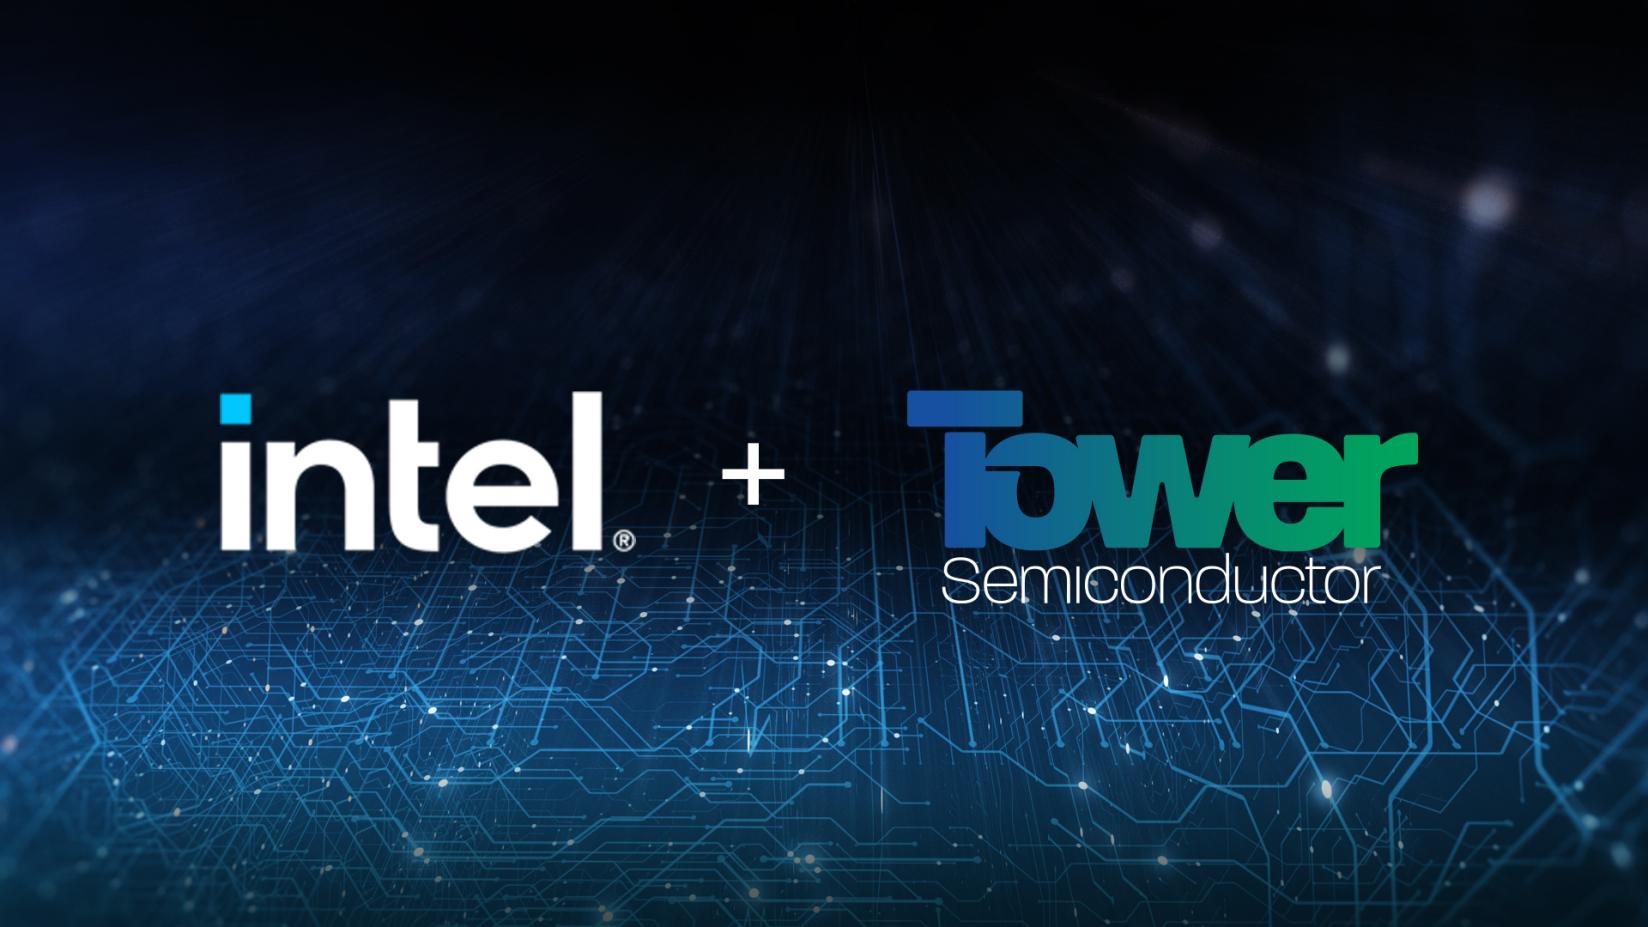 intel-tower-semiconductor